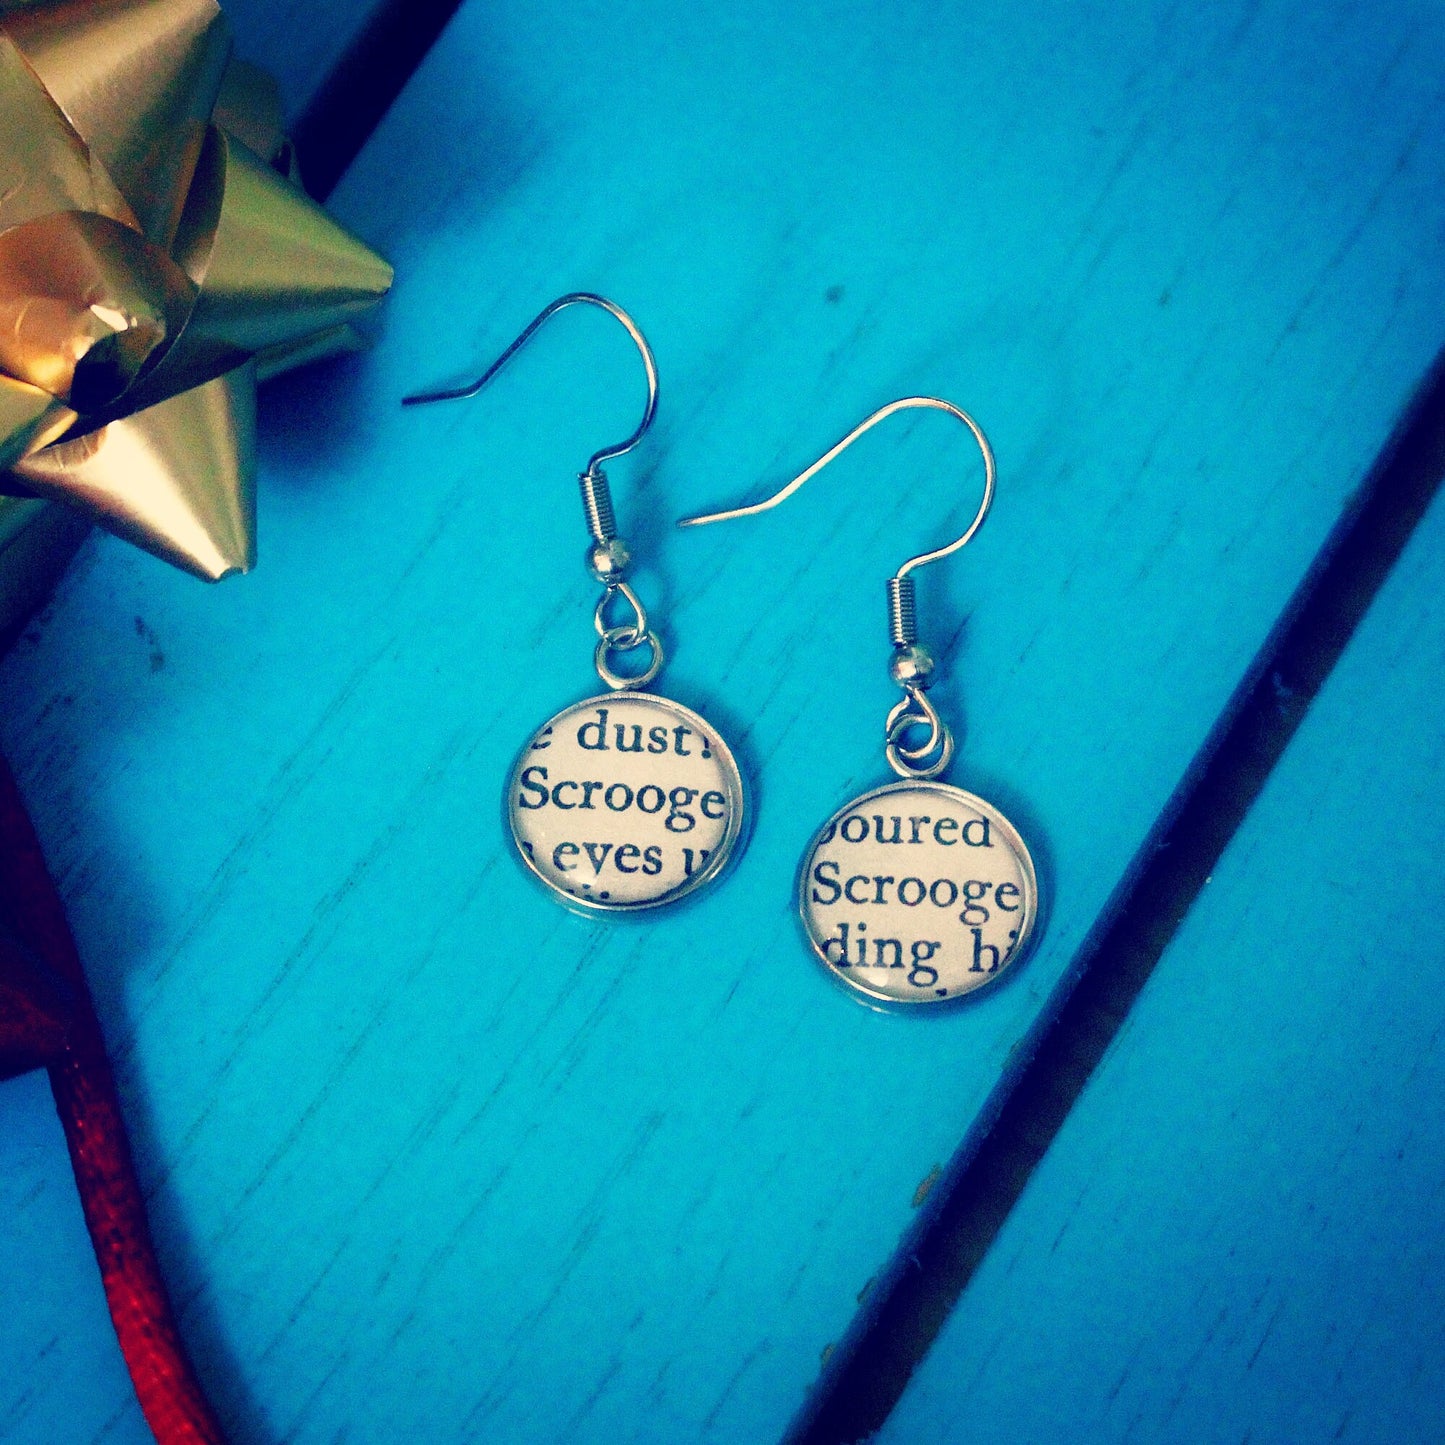 Scrooge earrings! Christmas Carol recycled book gift. Grinch. Ebenezer. Muppets. Charles Dickens. Novelty Xmas gift for her. Bah Humbug!